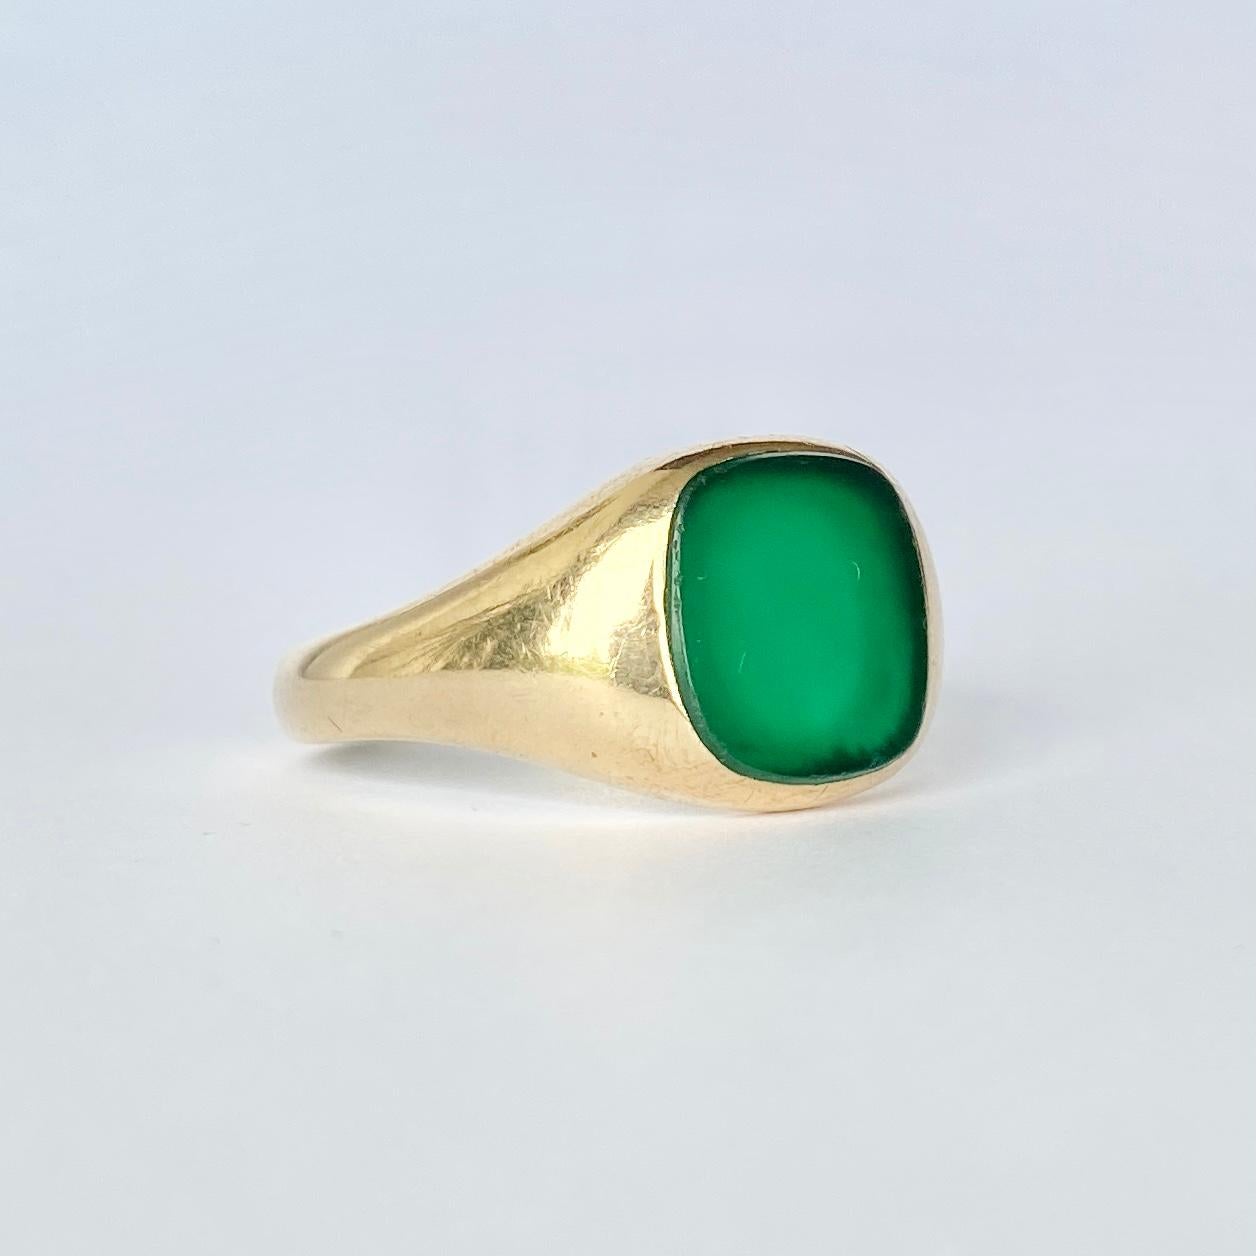 This gorgeous signet ring holds a deep green agate in a smooth gold setting. Fully hallmarked Sheffield 1971 and modelled in 9ct gold. 

Ring Size: Y 1/2 or 12 1/4
Stone Dimensions: 11.5x11mm 

Weight: 7g